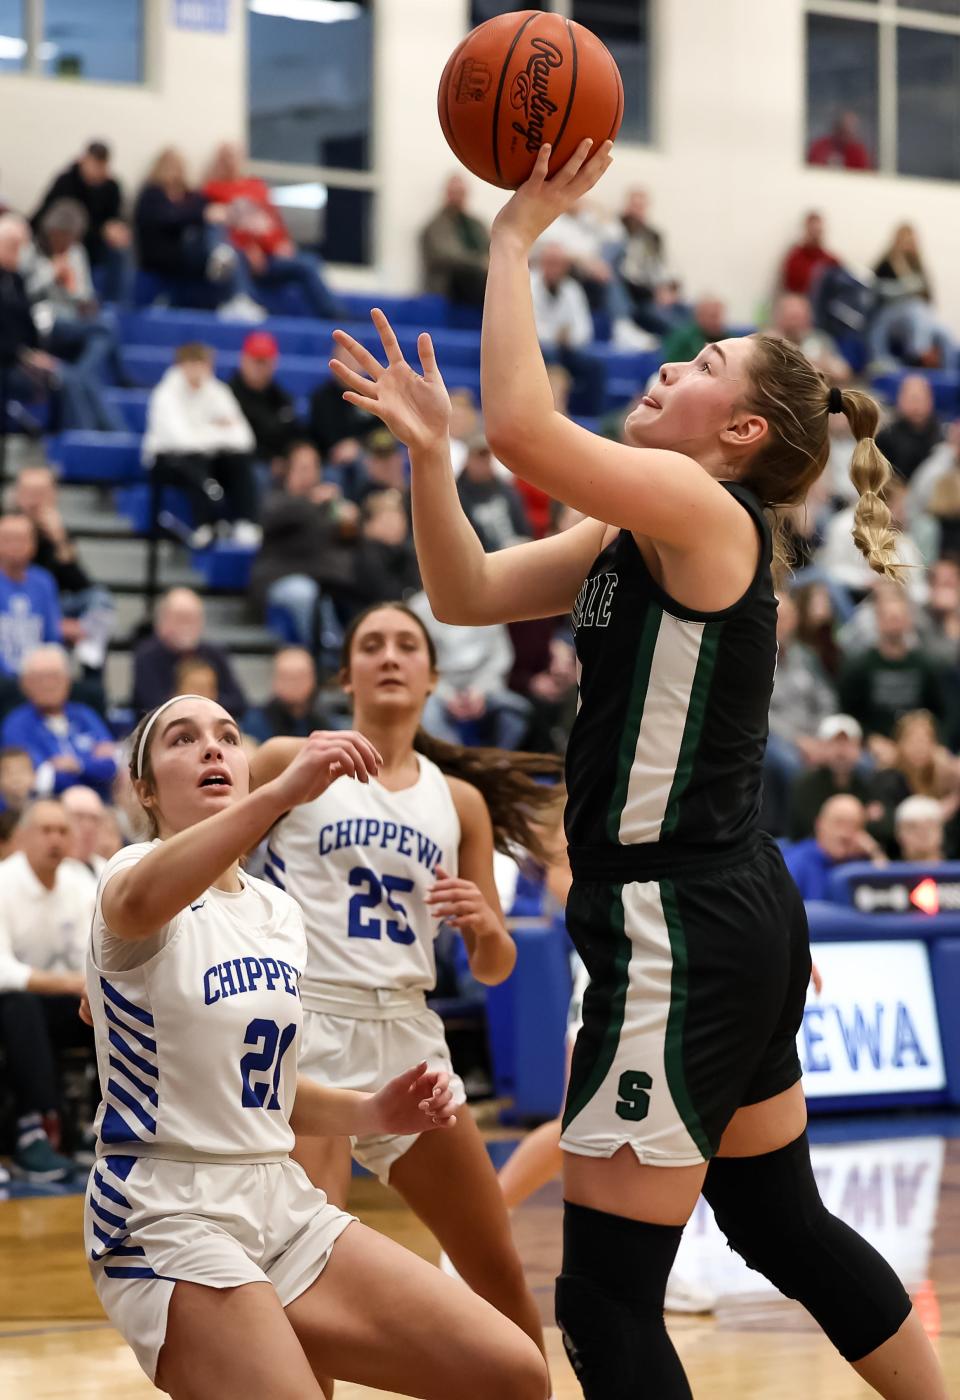 Smithville's Naomi Keib gets this bucket in the first half with Chippewa's Annabel Rodriguez watching on.